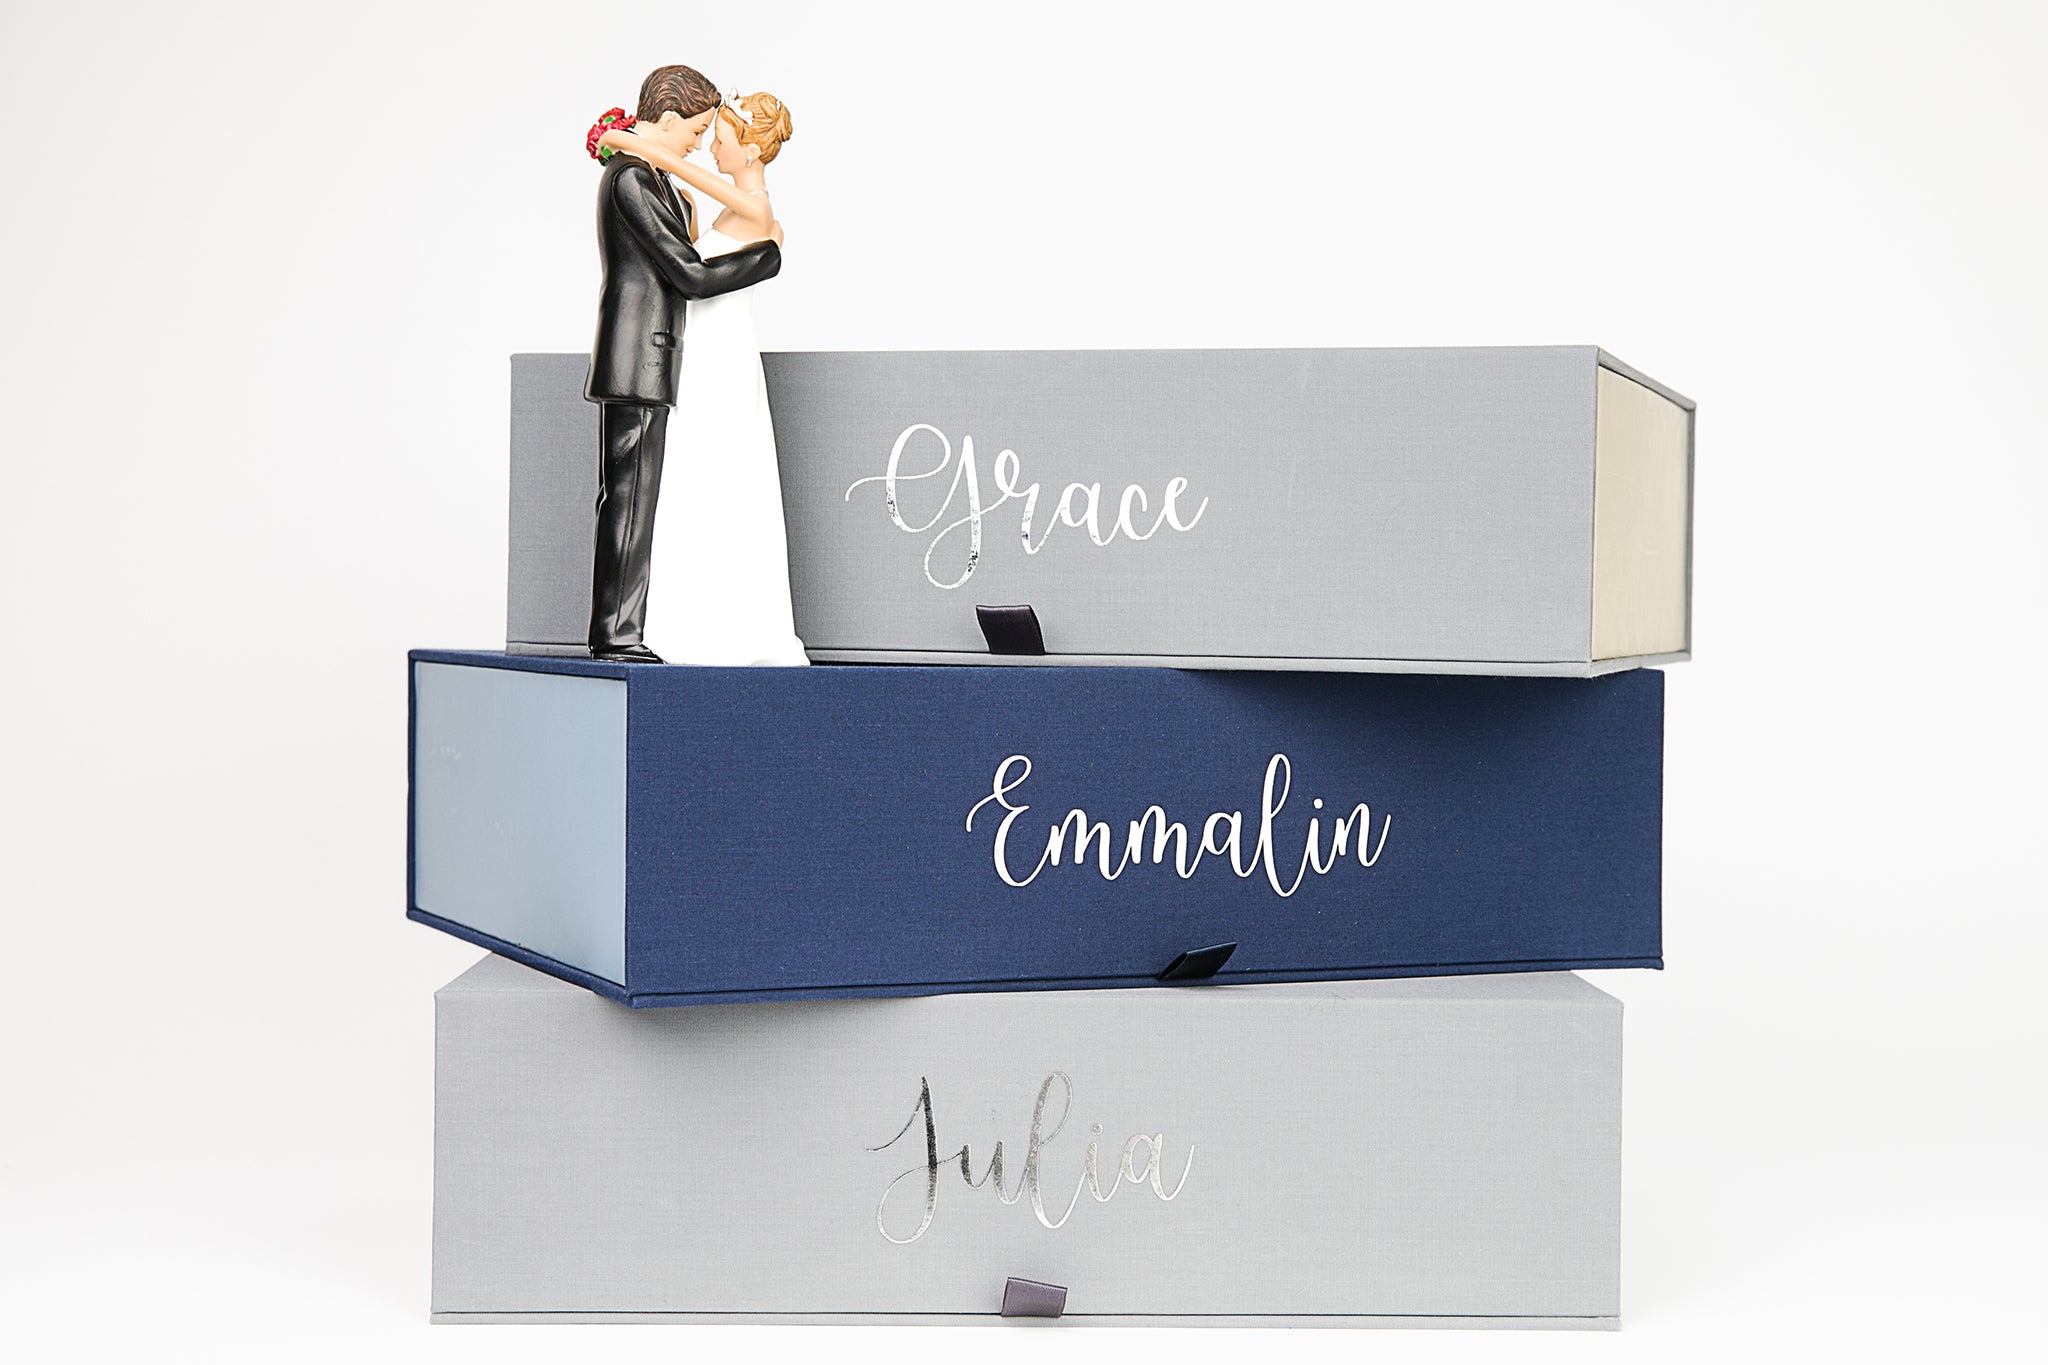 Blue and gray personalized organization boxes decorated with a couples figure.